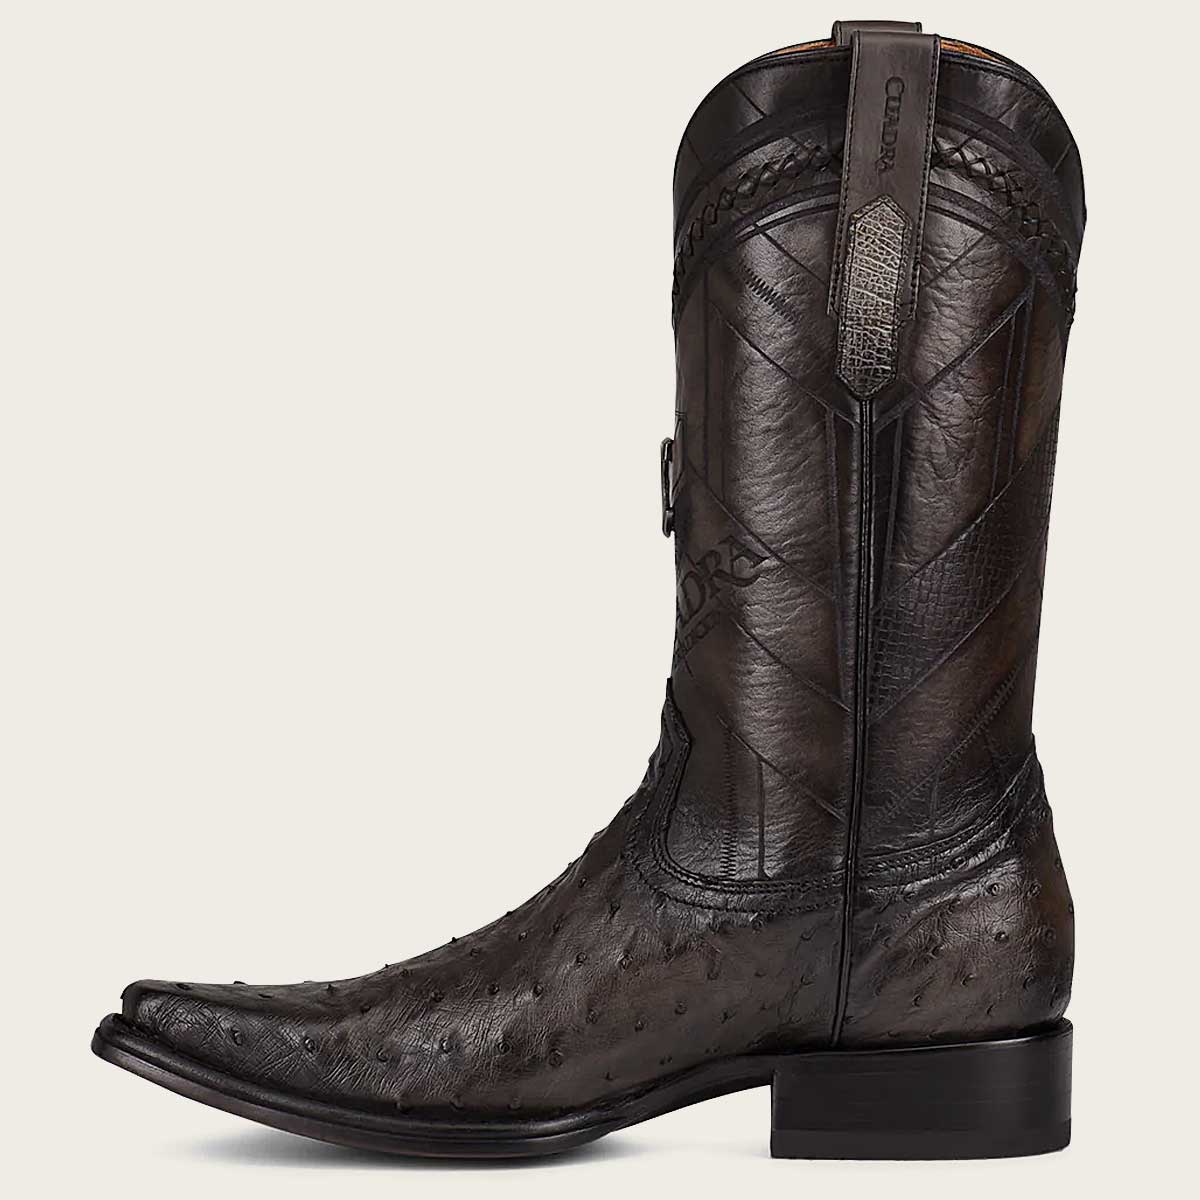 The leather sole of these boots is thoughtfully designed with an anti-slip TPU graft, ensuring both durability and longev